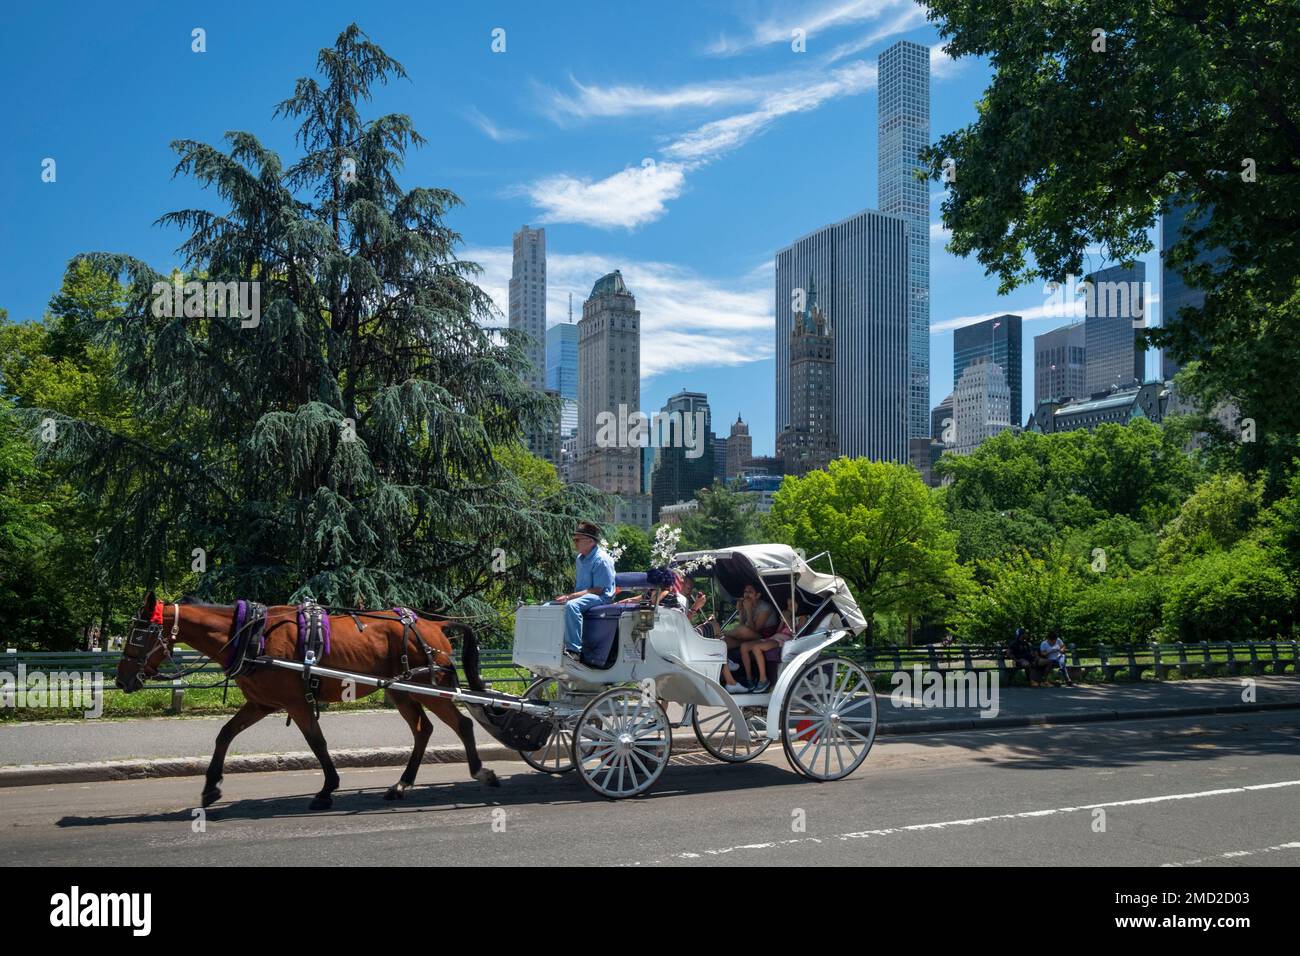 Horse Carriage Ride through Central Park with New York city behind, Central Park, New York, USA Stock Photo